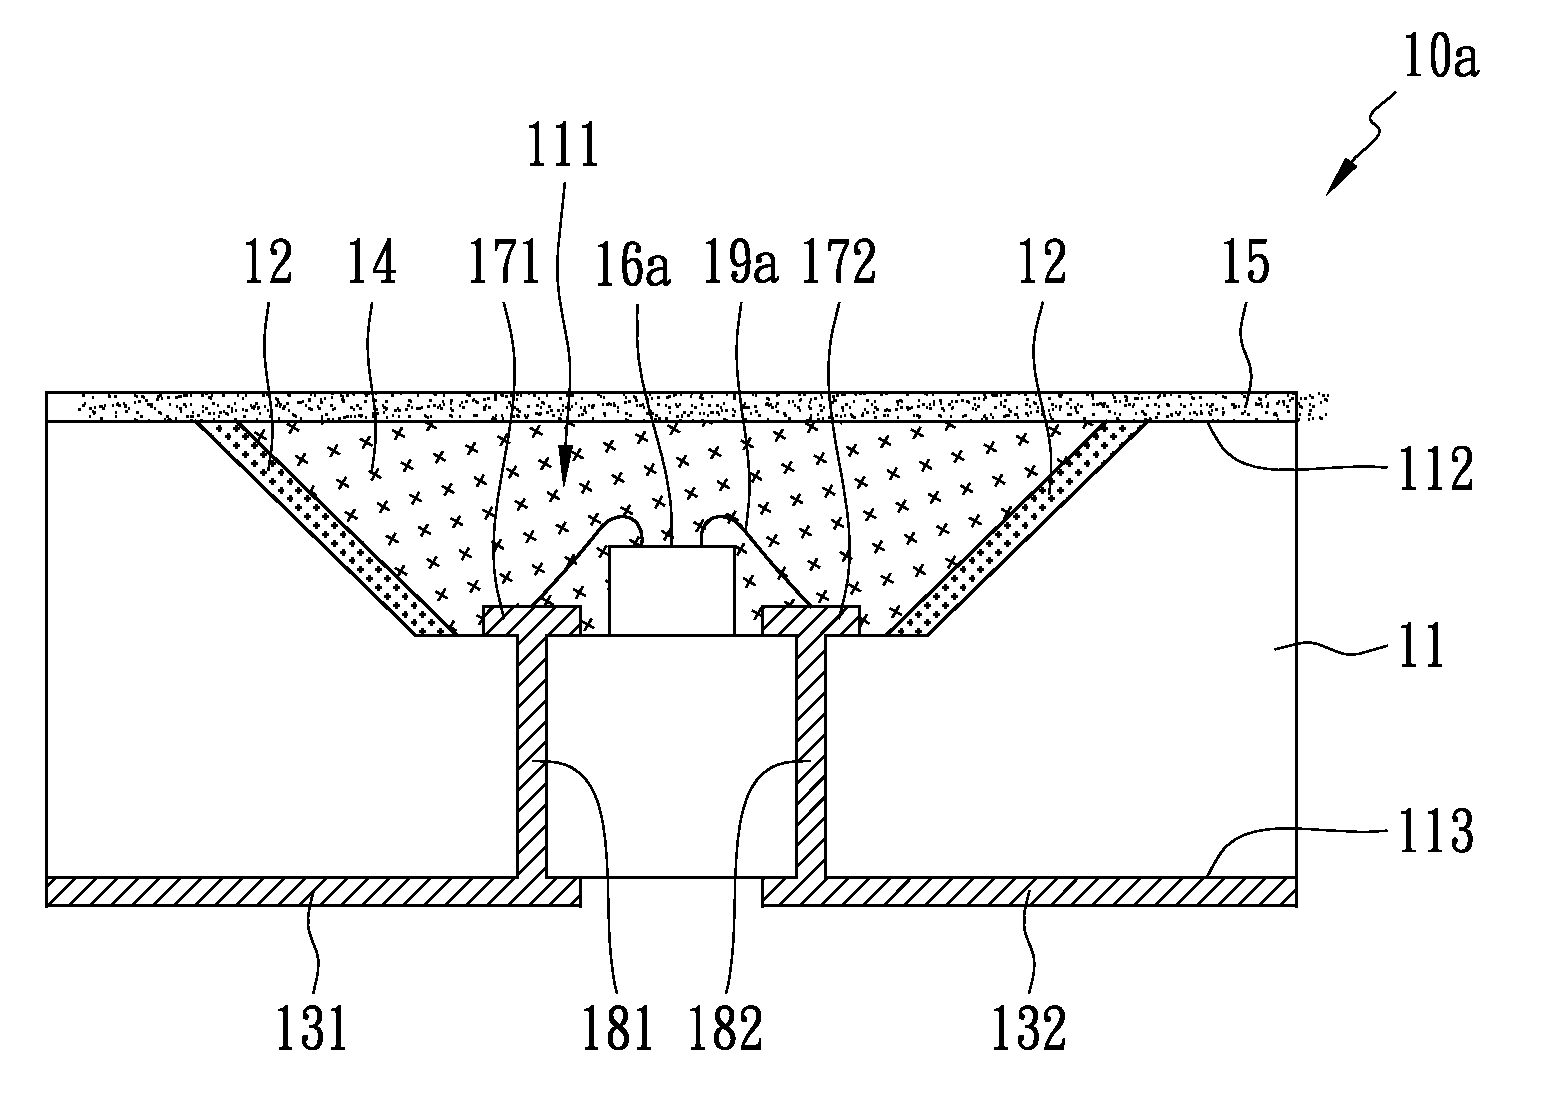 Package structure of a light emitting diode device and method of fabricating the same